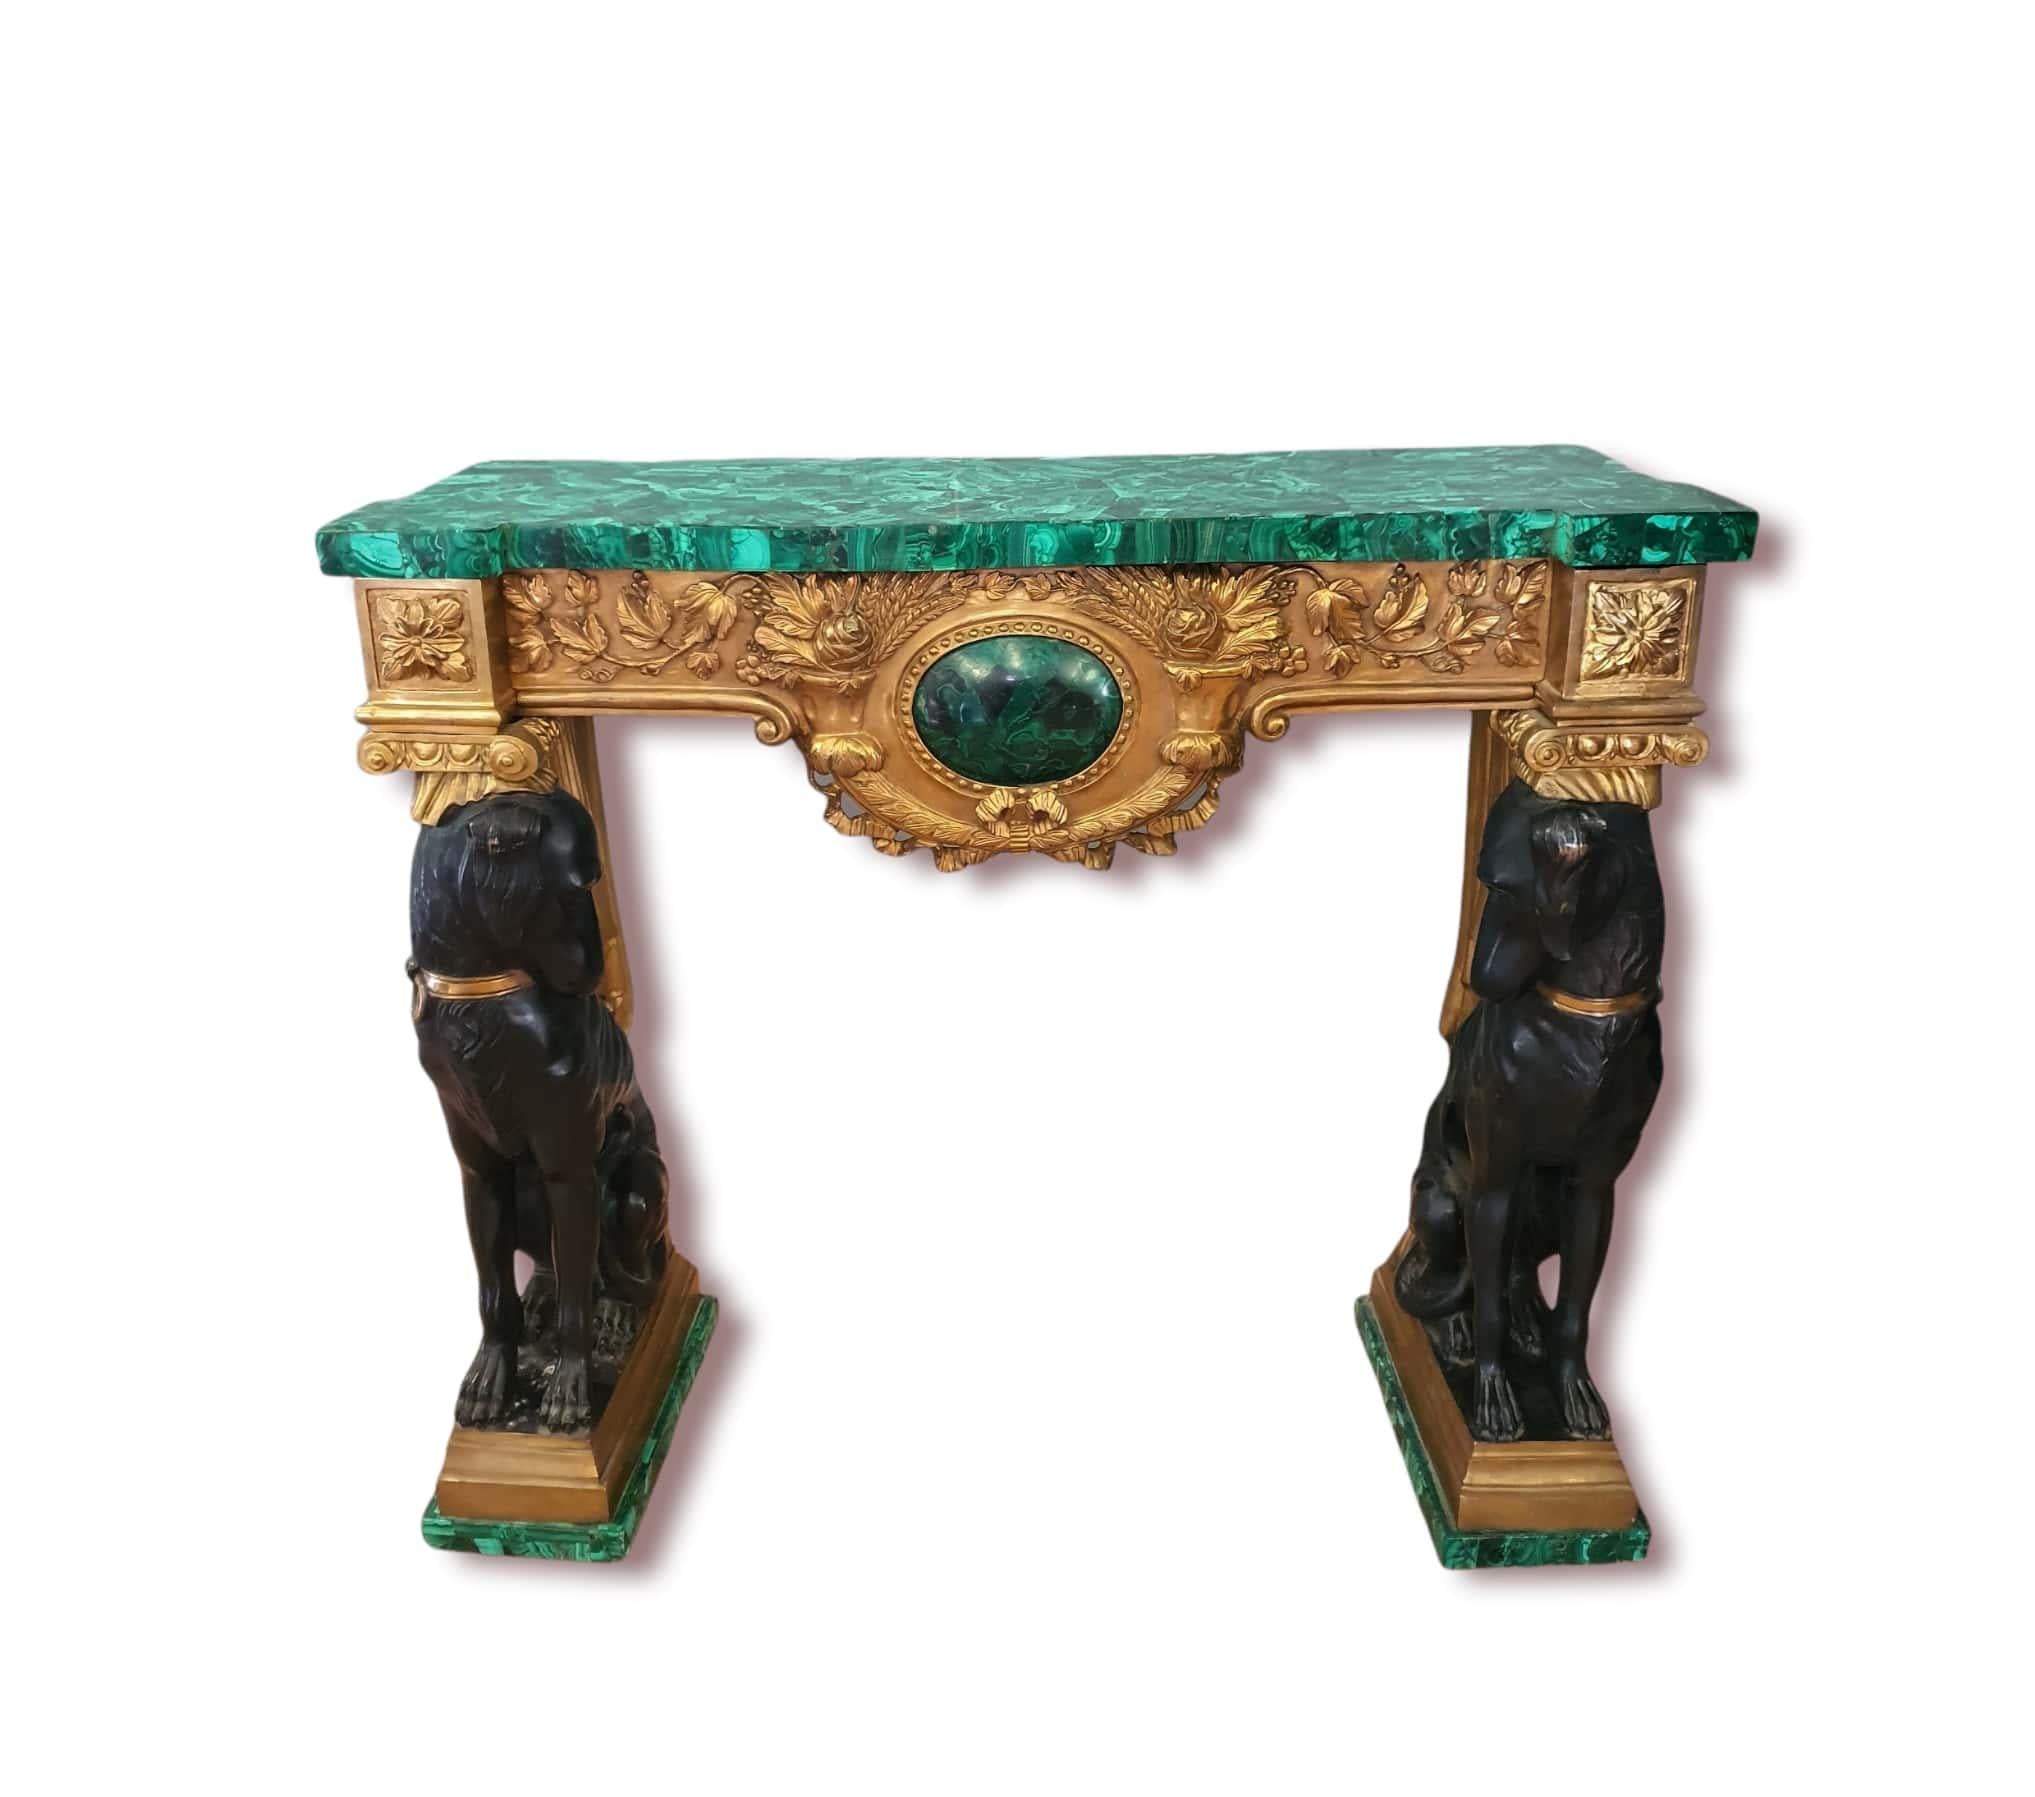 Important pair of consoles, made of patinated bronze and finely chiseled and gilded bronze. At the base we find two flowered malachite bases where two dogs rest, made of patinated and gilded bronze, looking at each other, and supporting the front